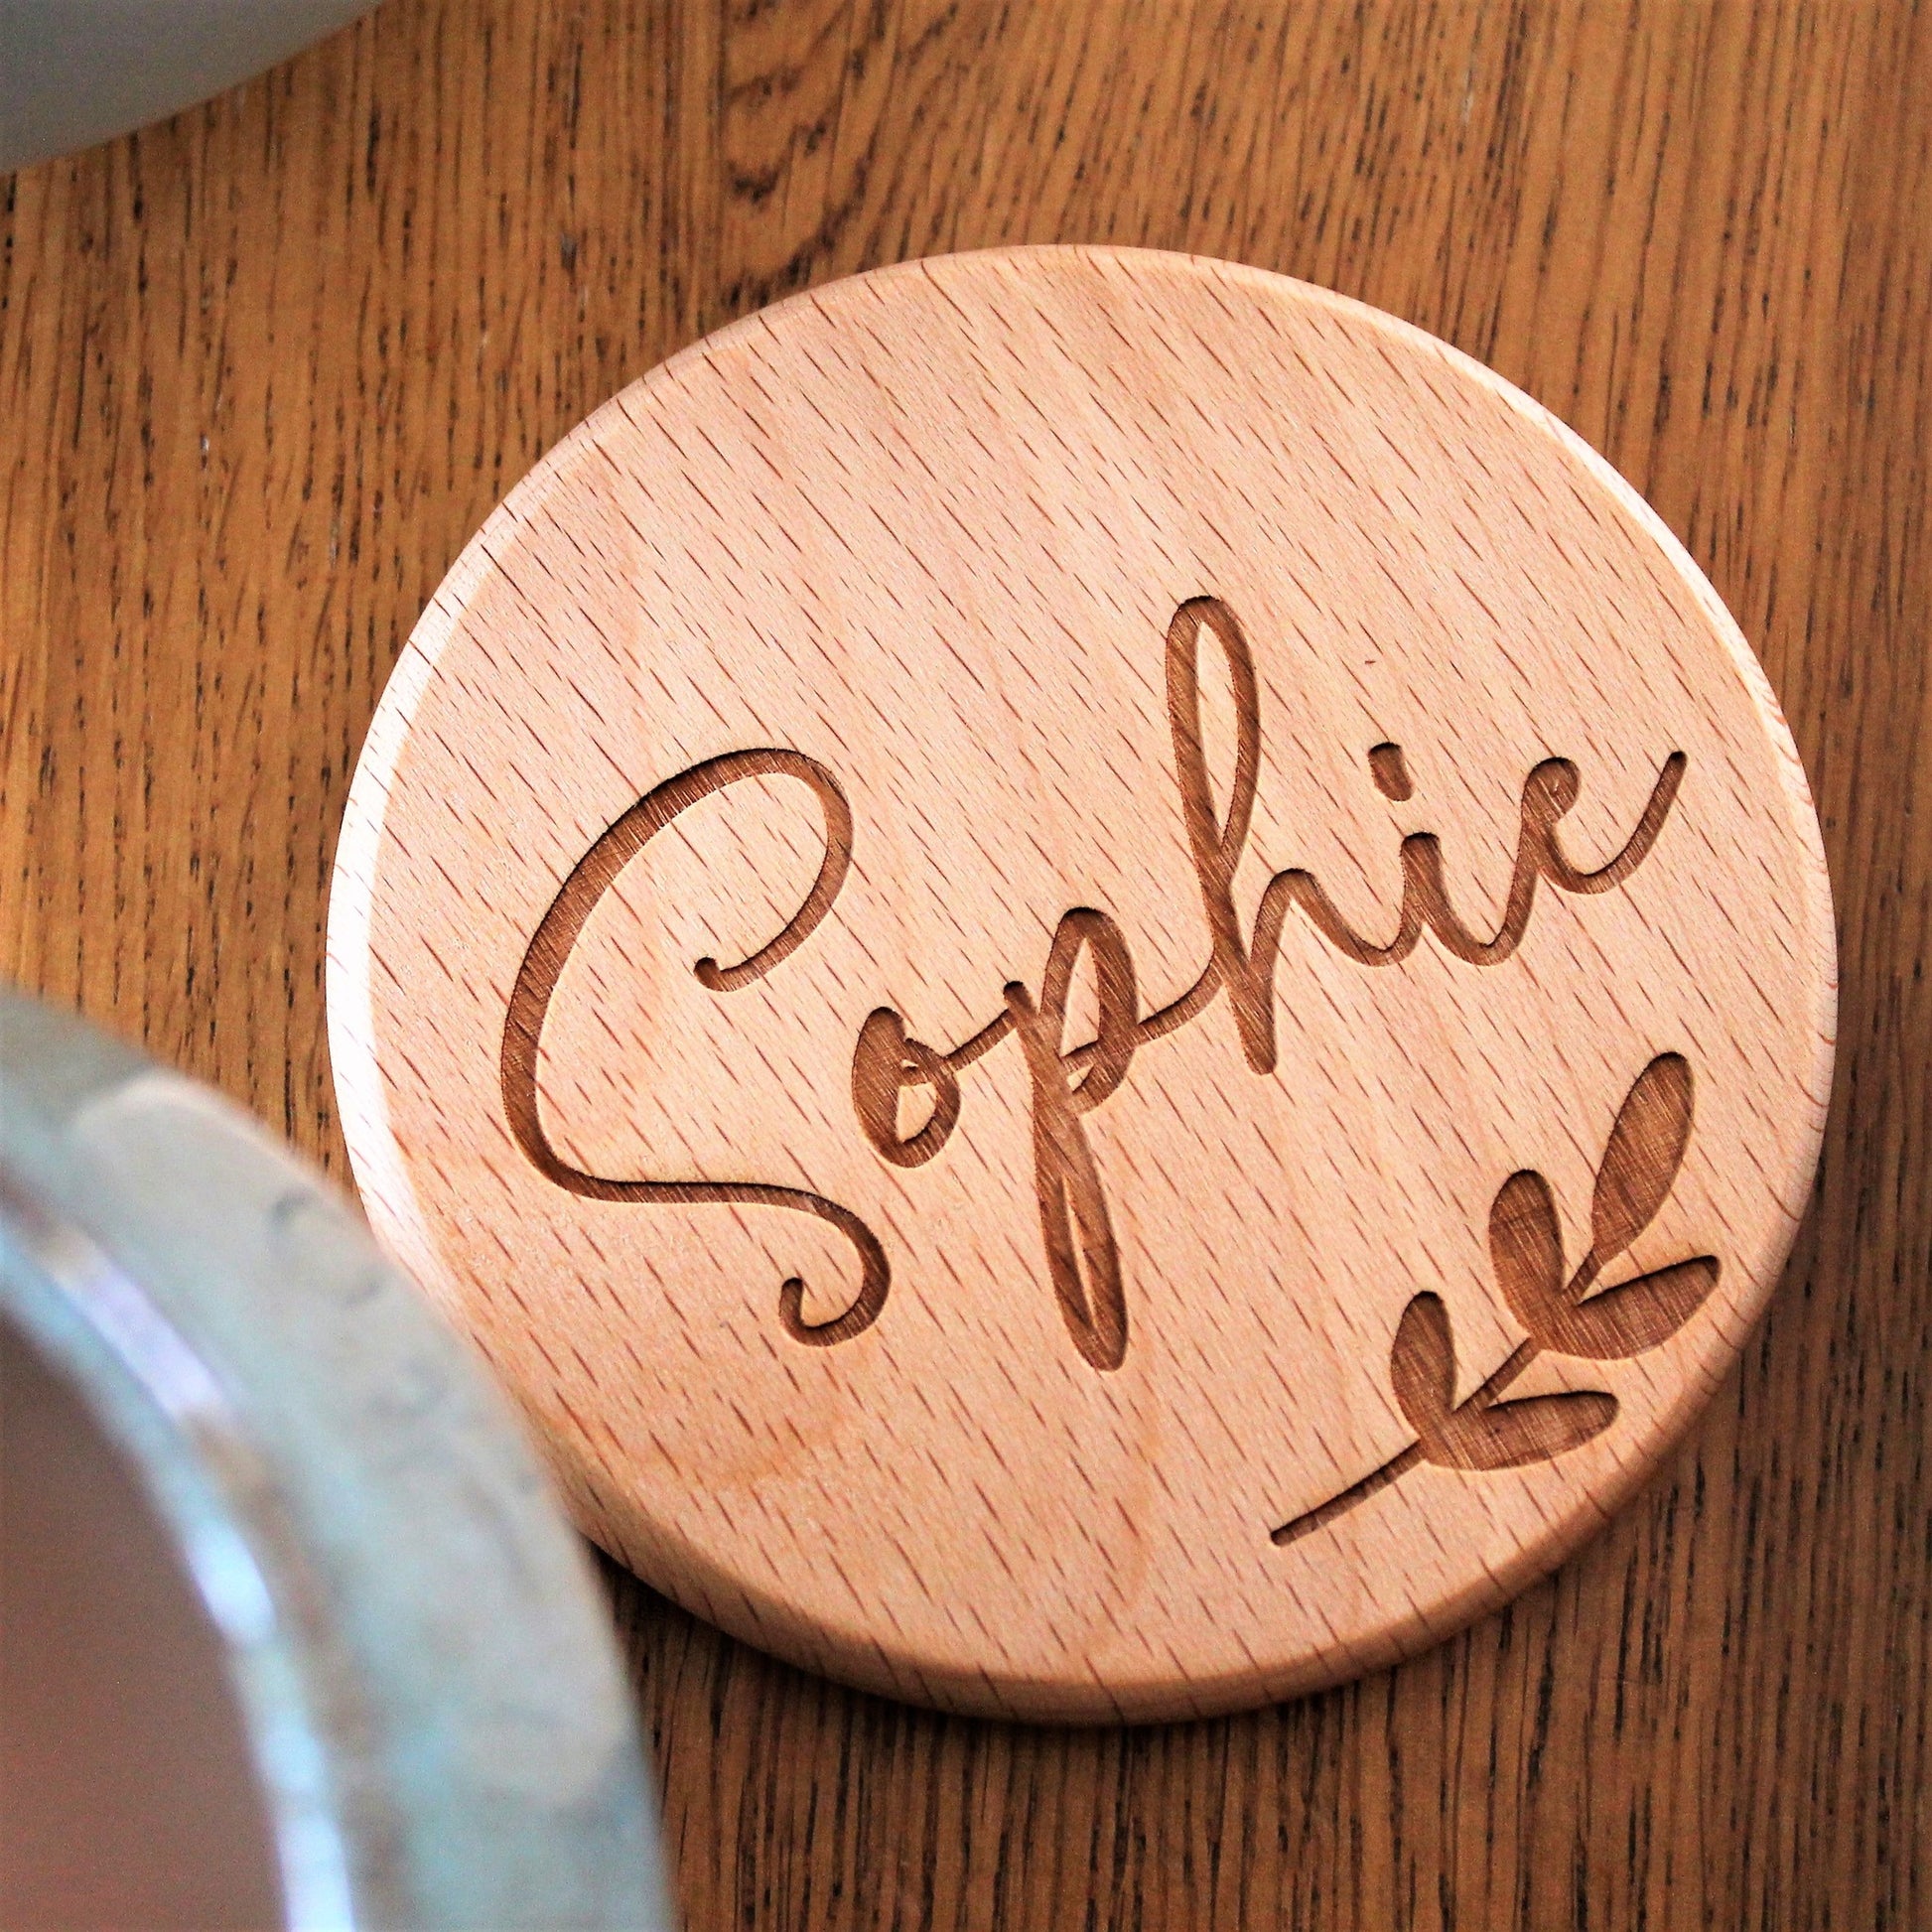 wooden coaster with engraved name and leaf design